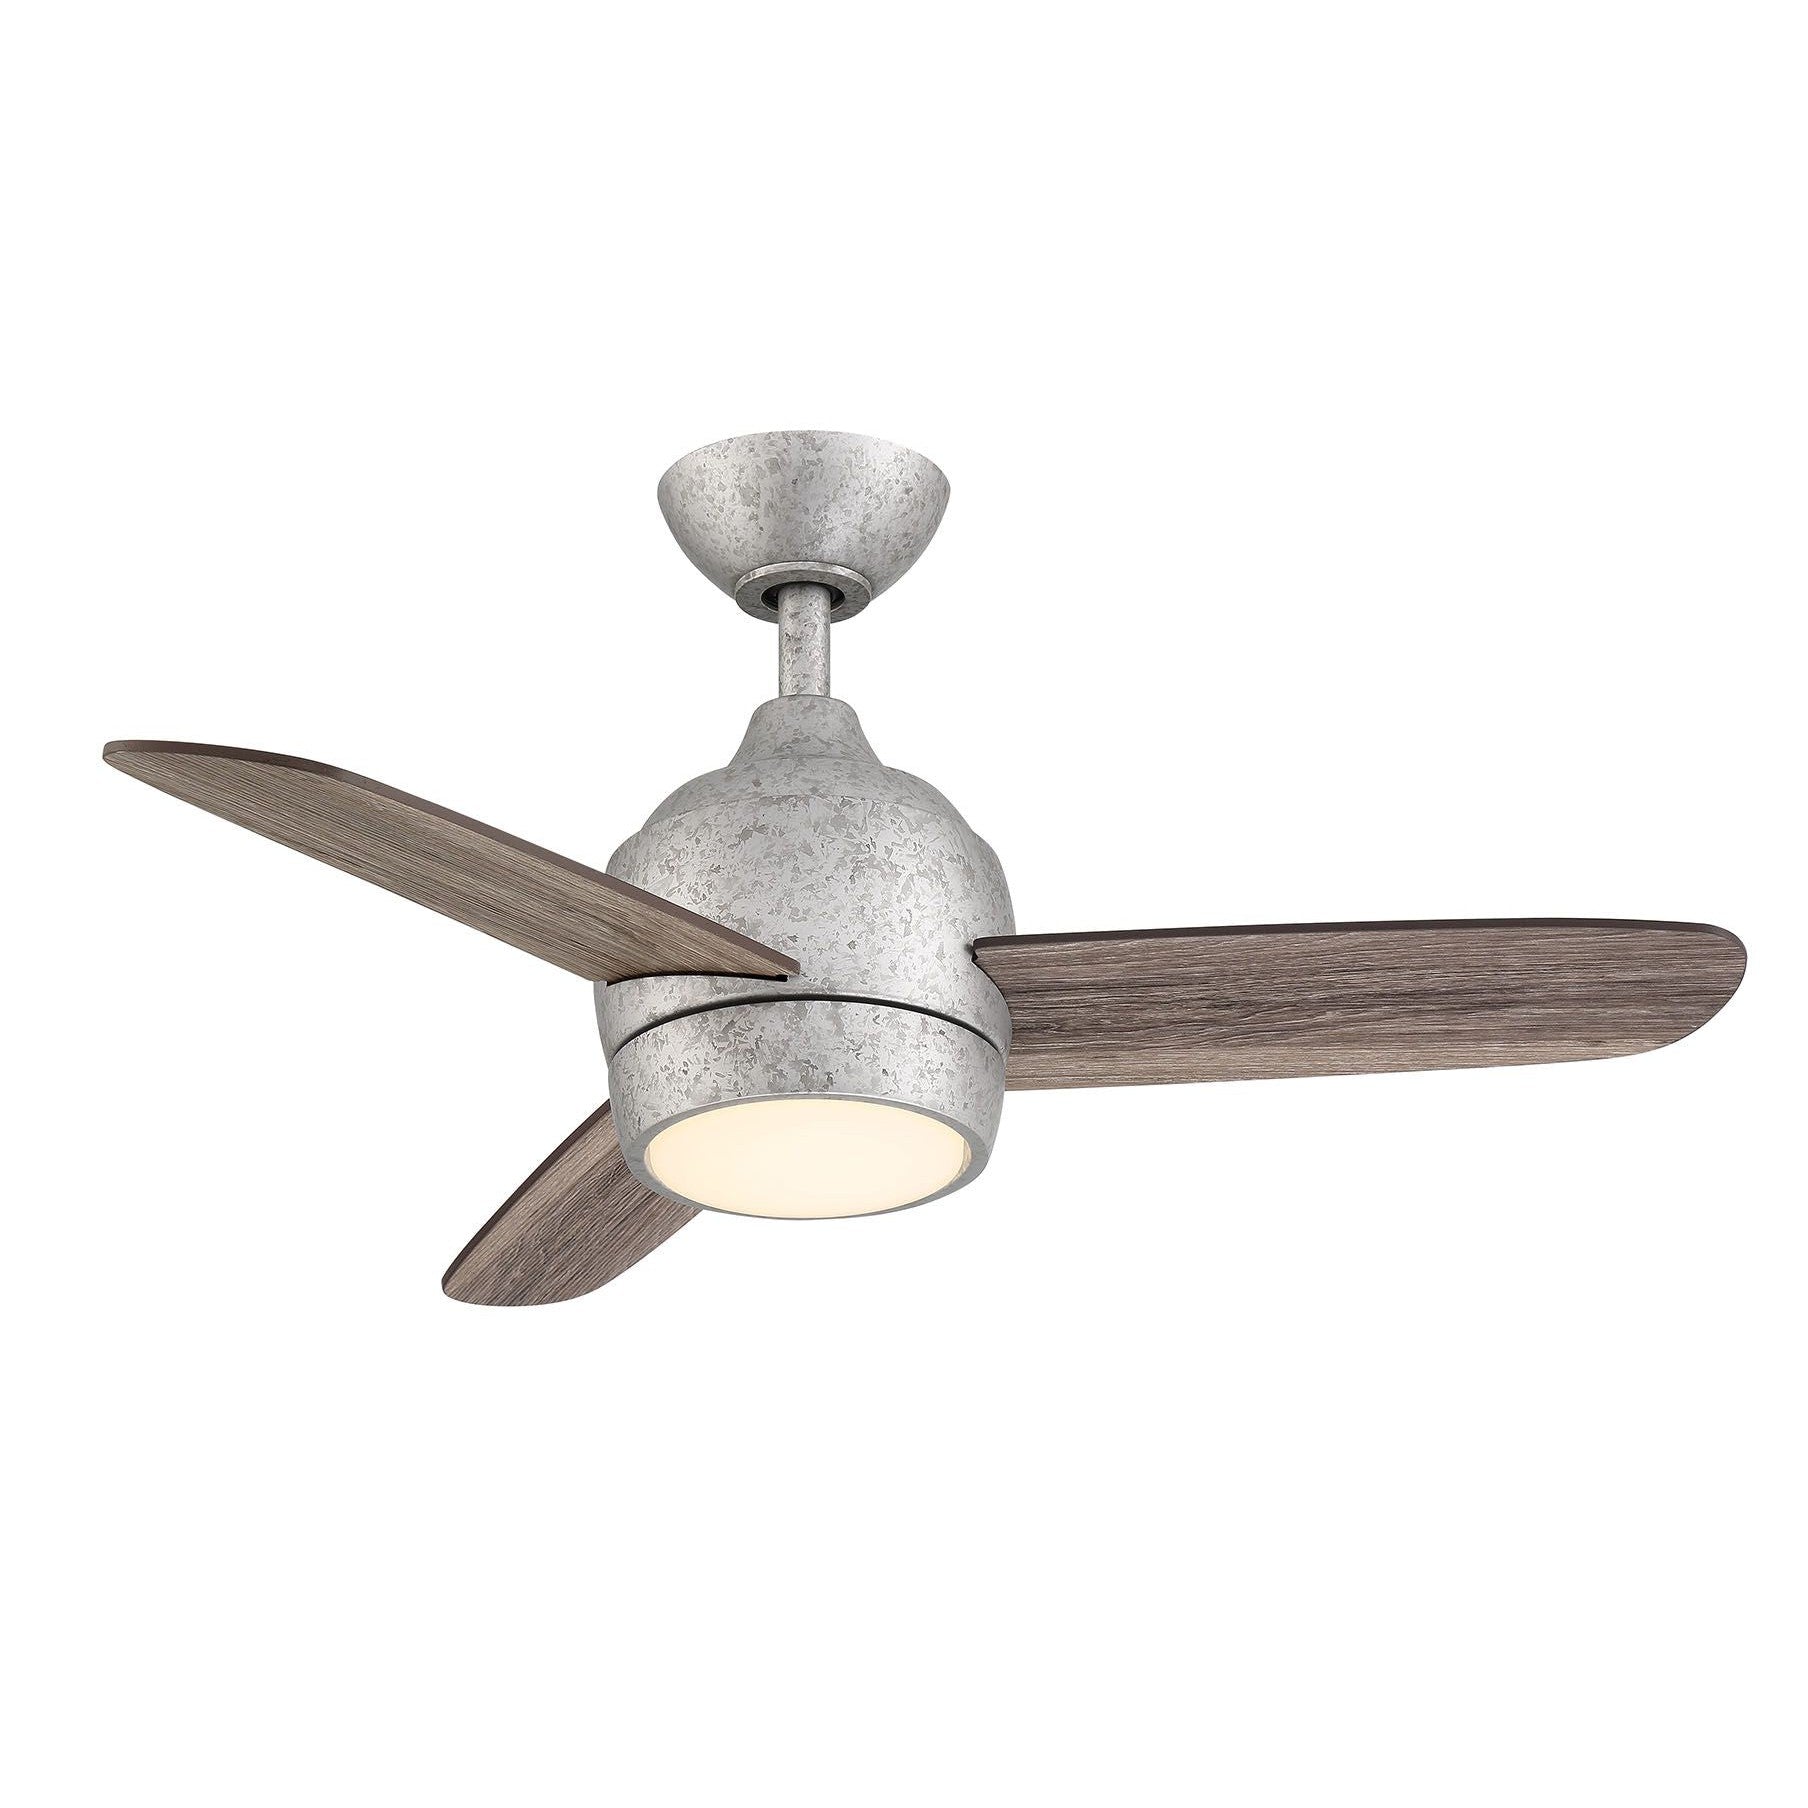 Wind River Fans The Mini 36" 3 Blade Outdoor LED Ceiling Fan - Image 1